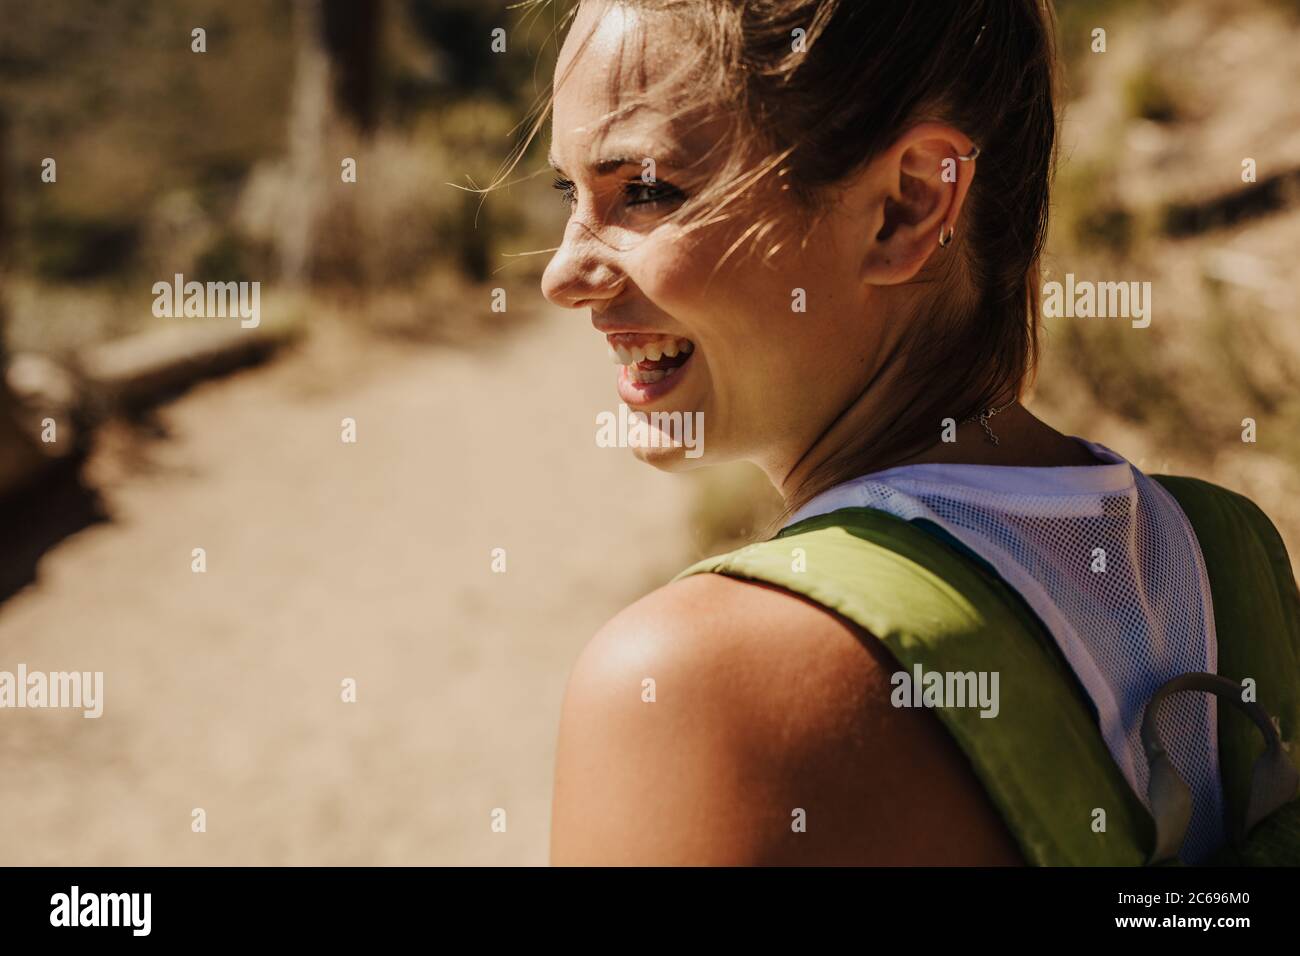 Close-up of a smiling woman hiker on mountain trail. Woman hiking a mountain looking happy. Stock Photo